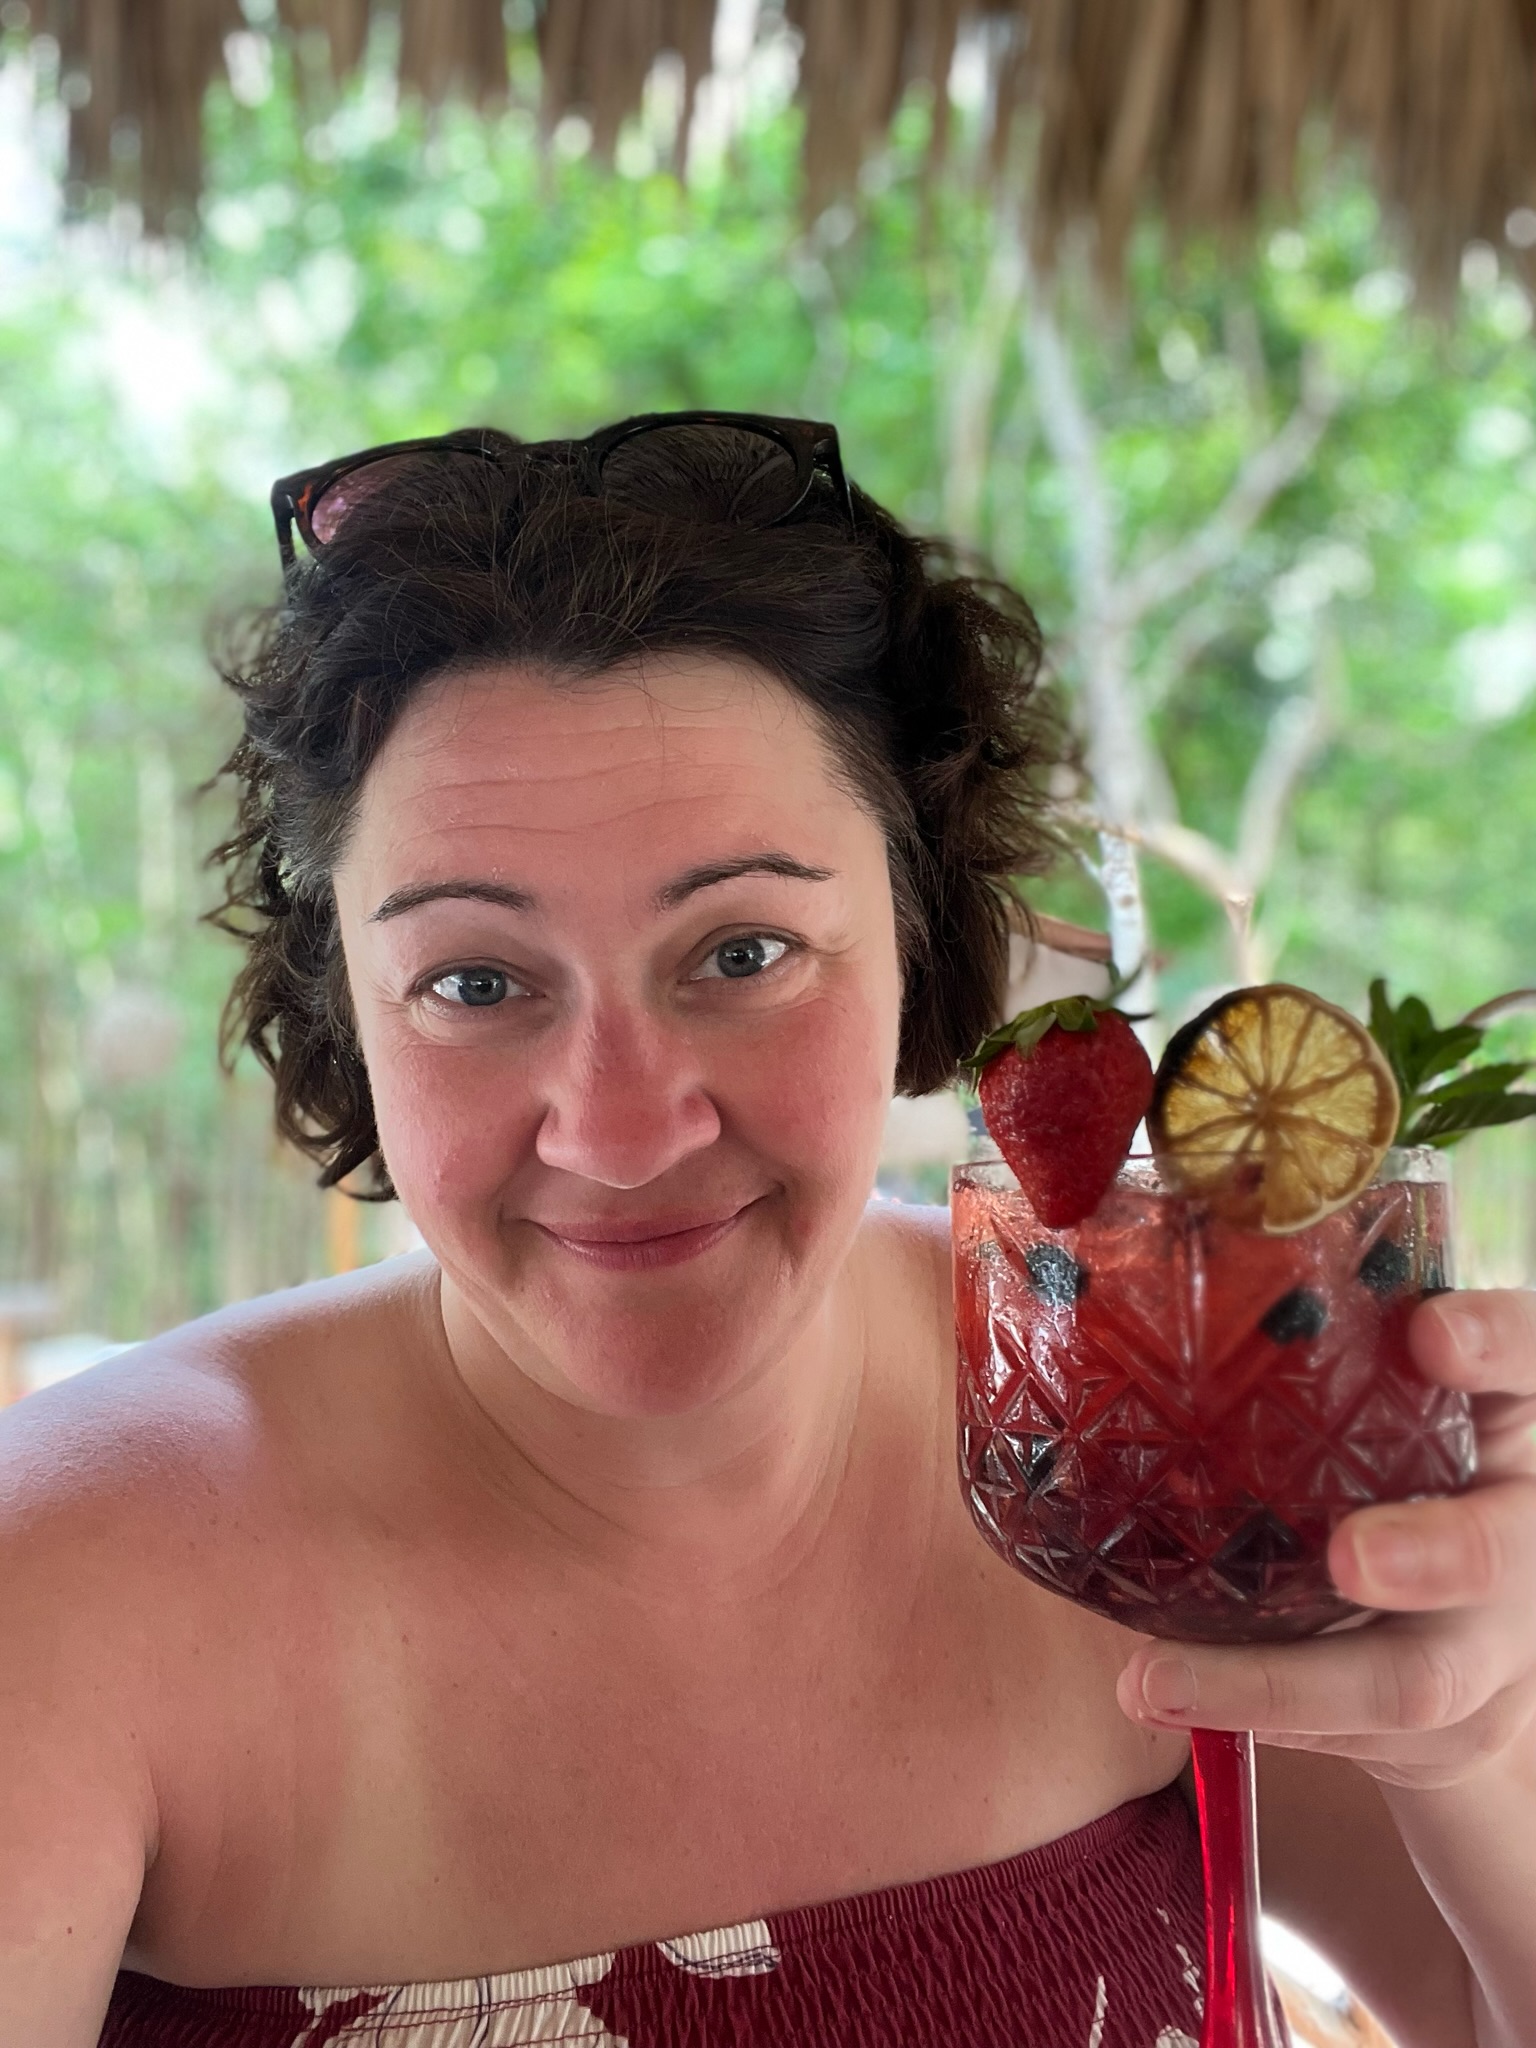 A guest enjoying fabulous cocktails made with organic fresh fruit like oranges, strawberries, and blueberries at Fuegos de Xul-Ha in the Mayan jungle on the Ruta de Cenotes outside Puerto Morelos.